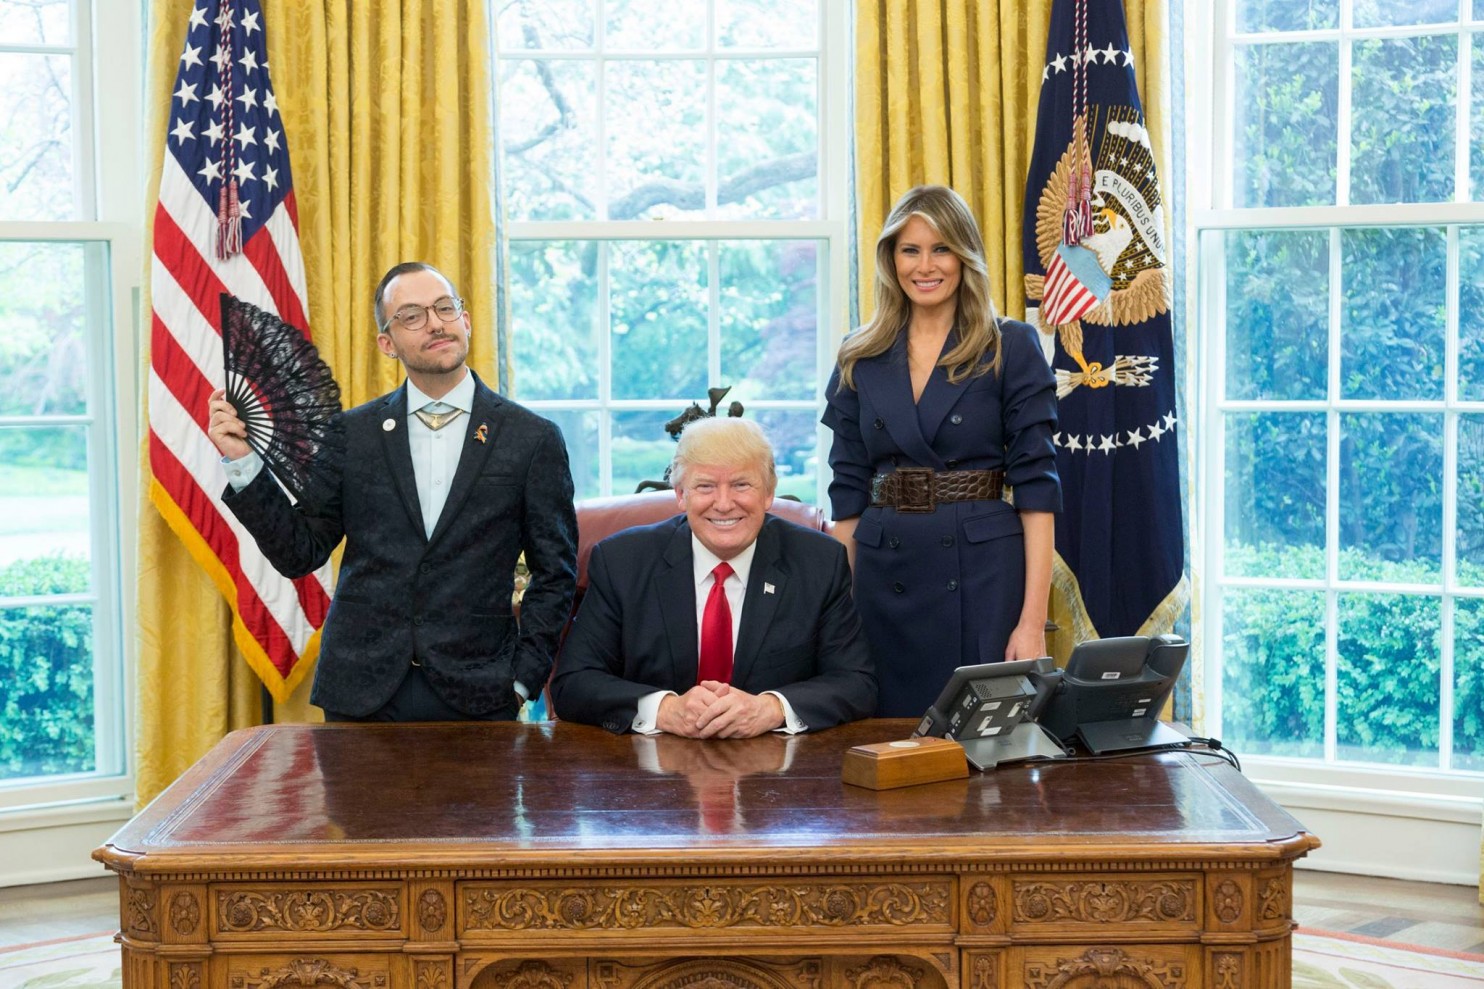 Nikos Giannopoulos, Rhode Island Teacher of the Year, decided to be “visibly queer” in his White House picture with the Trumps